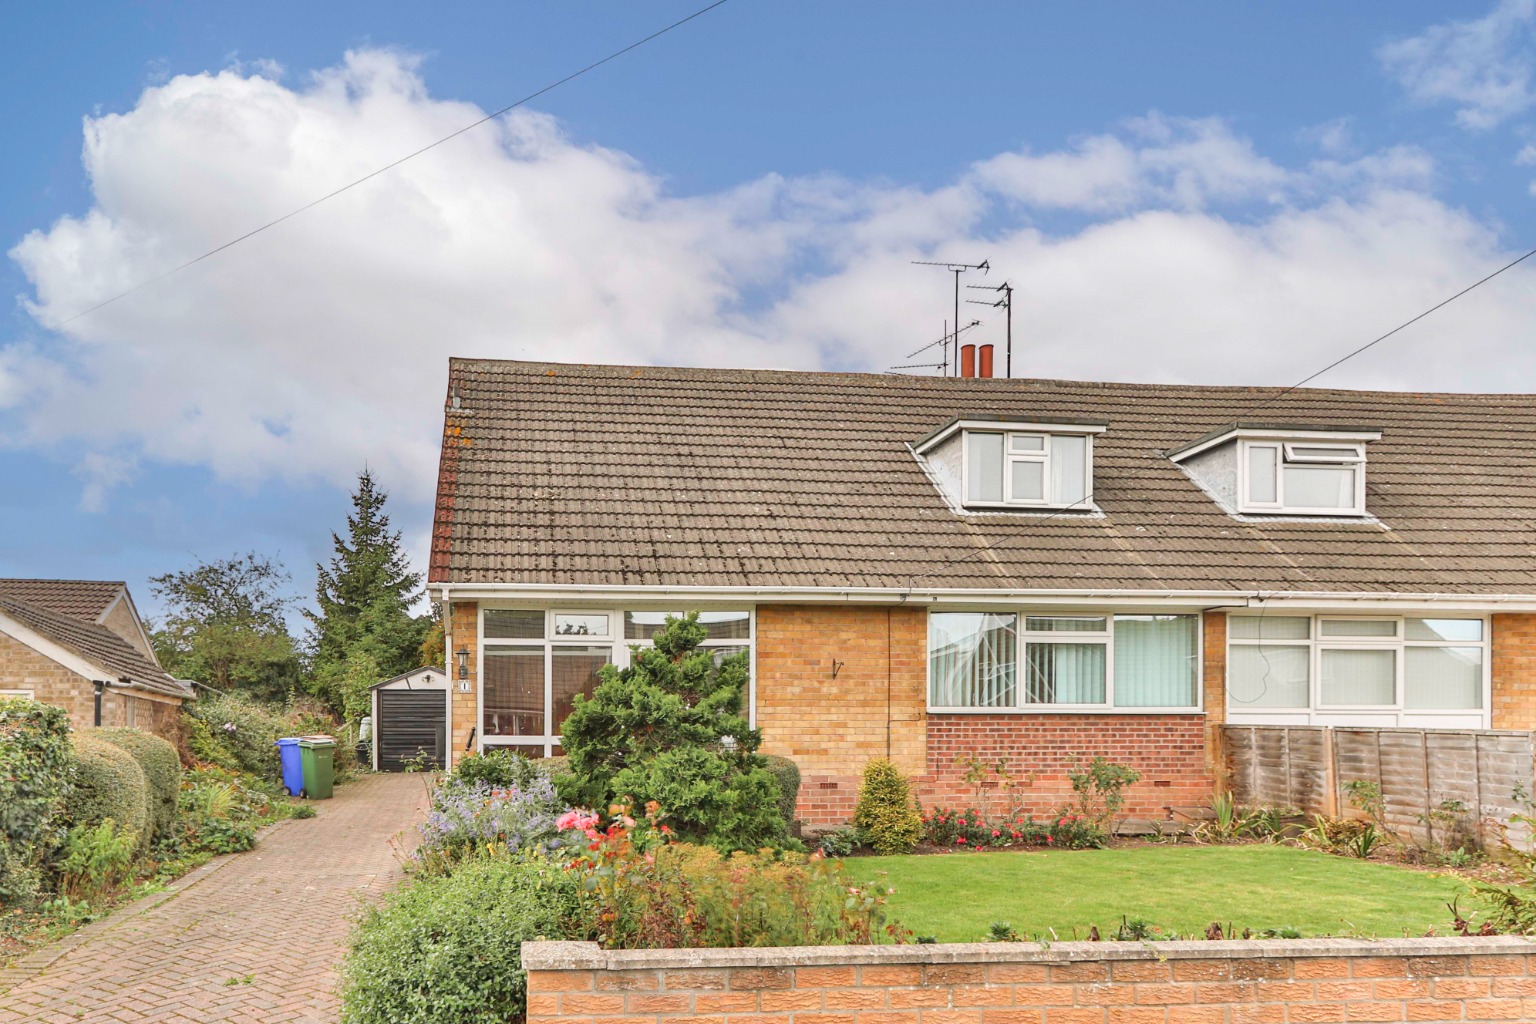 4 bed semi-detached bungalow for sale in Orchard Road, Cottingham, HU16